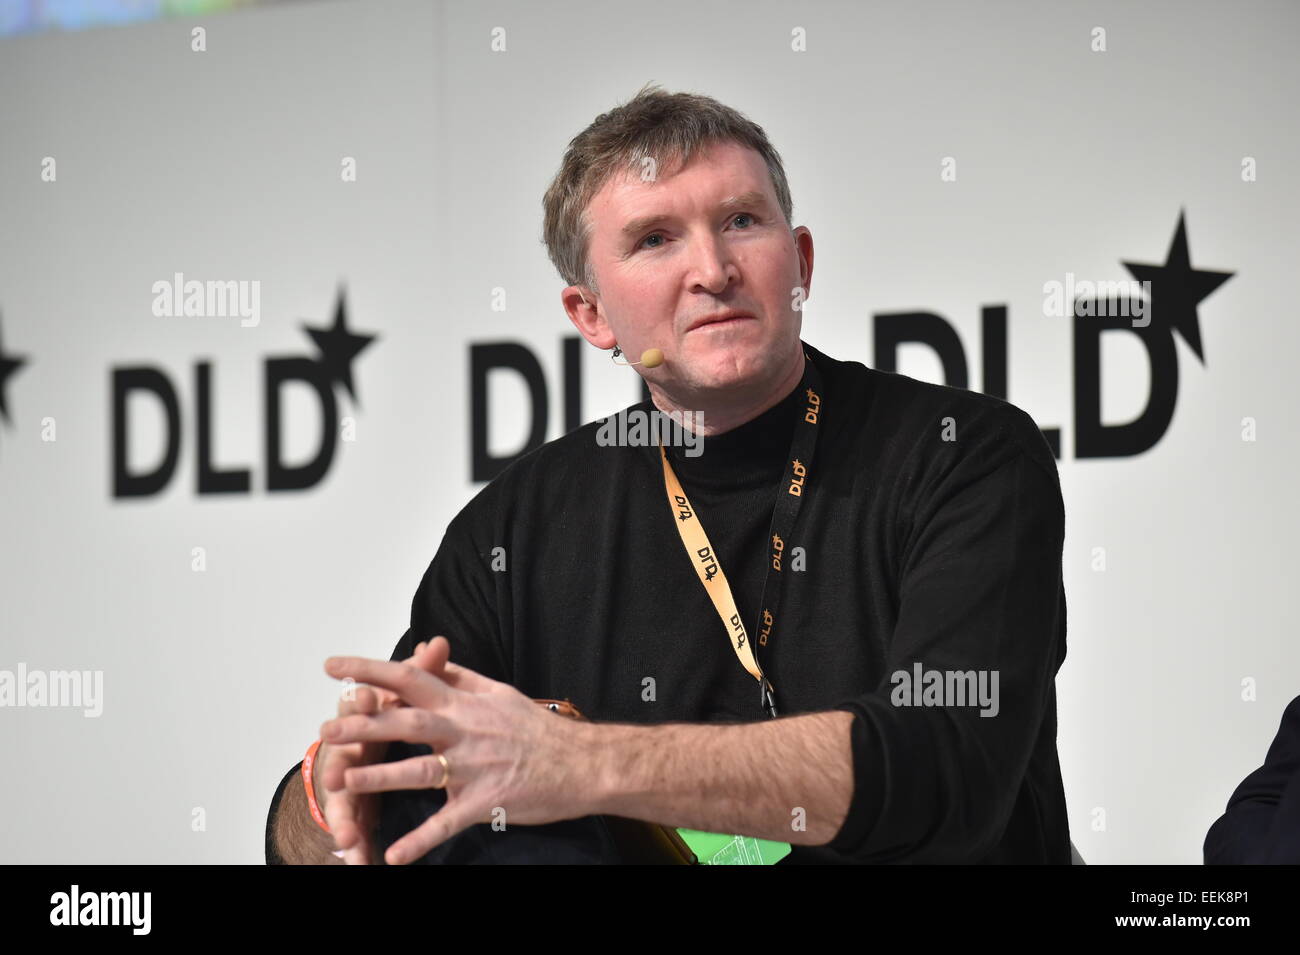 MUNICH/GERMANY - JANUARY 19: Niall Murphy (Evrything) listens on the podium during the DLD15 (Digital-Life-Design) Conference at the HVB Forum on January 19, 2015 in Munich, Germany. DLD is a global network of innovation, digitization, science and culture, which connects business, creative and social leaders, opinion formers and influencers for crossover conversation and inspiration.(Photo: picture alliance / Kai-Uwe Wärner)/picture alliance Stock Photo